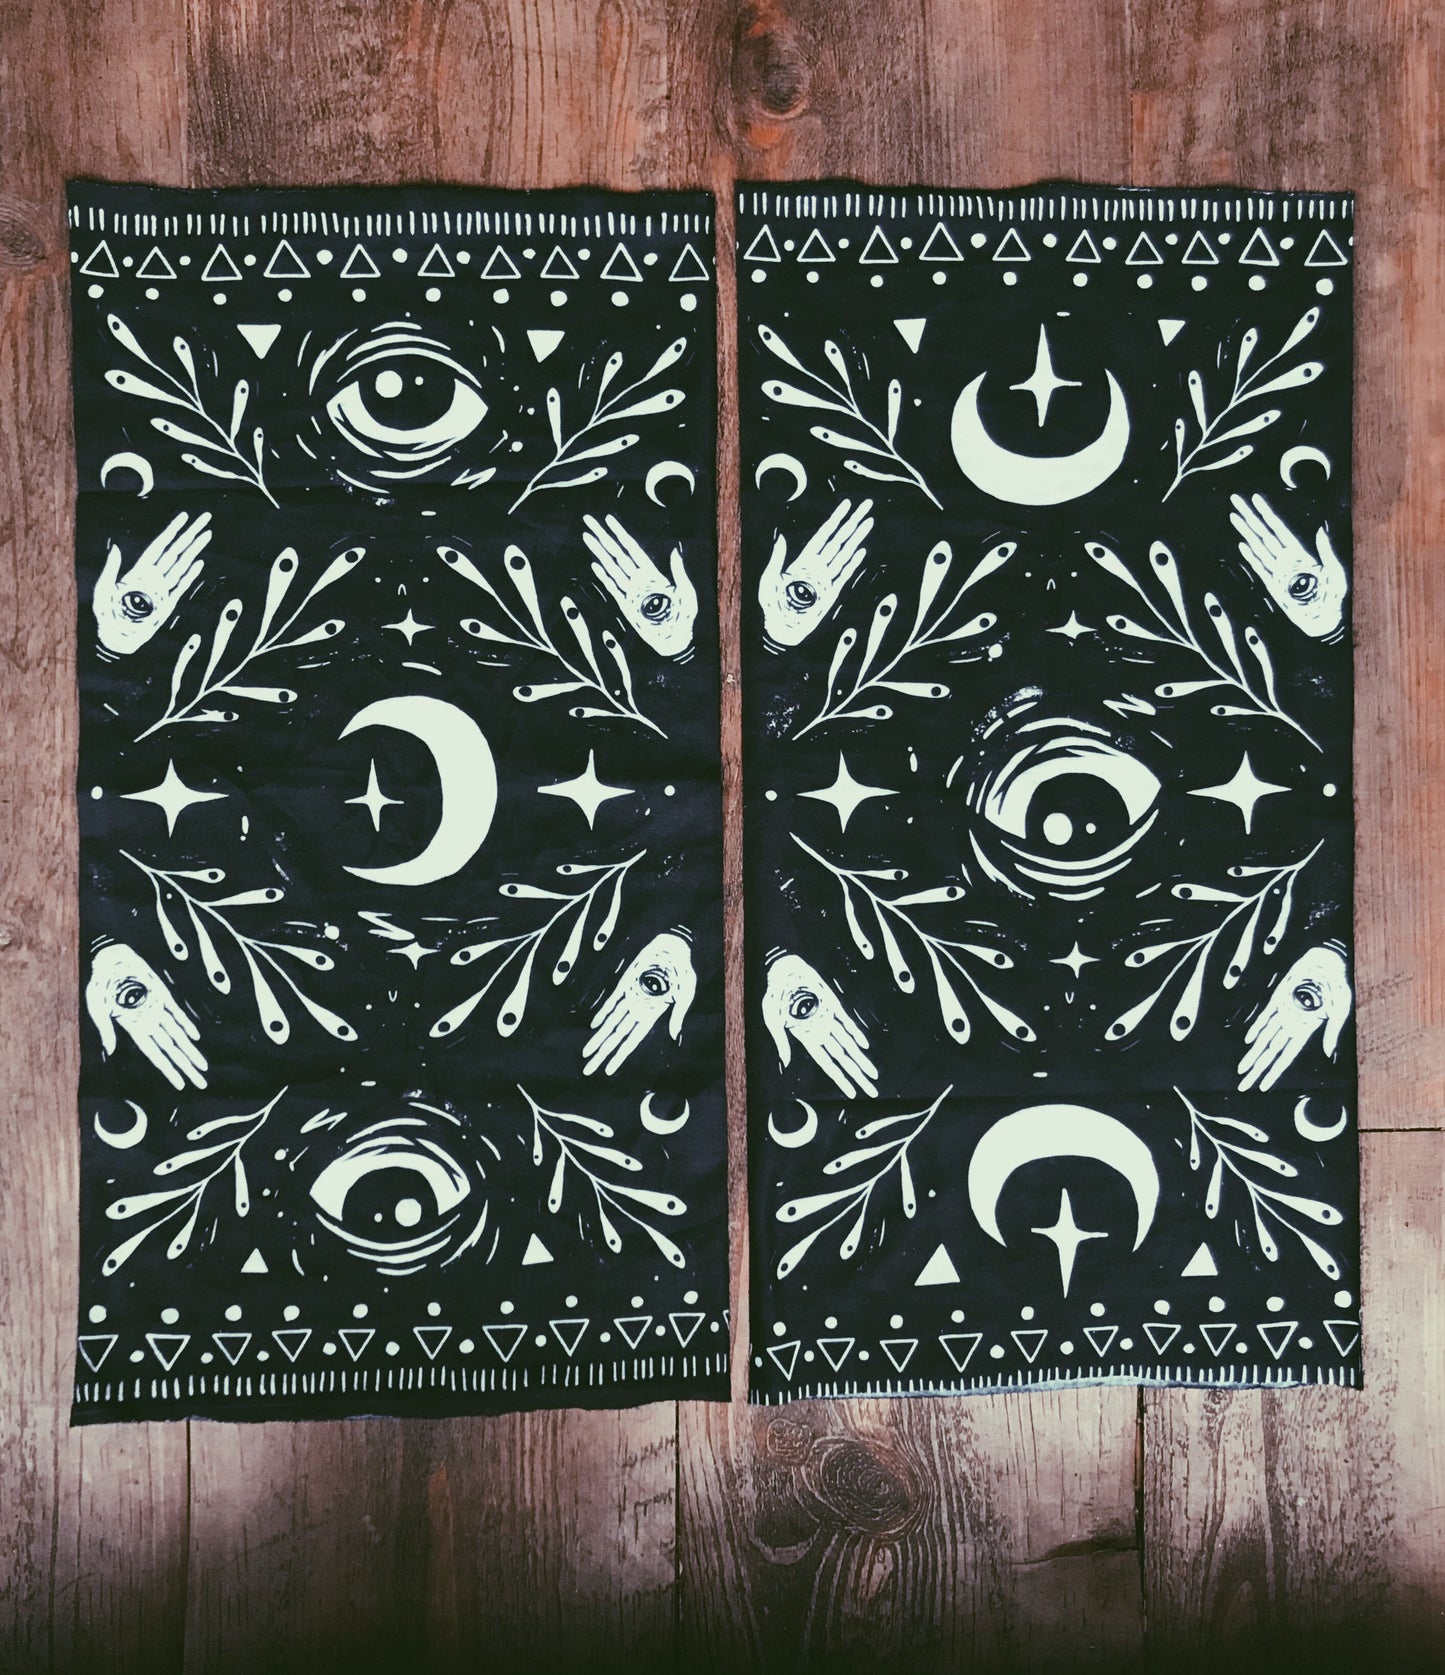 Moon Child Tube Bandana - 9” x 18” Protective Face Covering  - Limited Edition